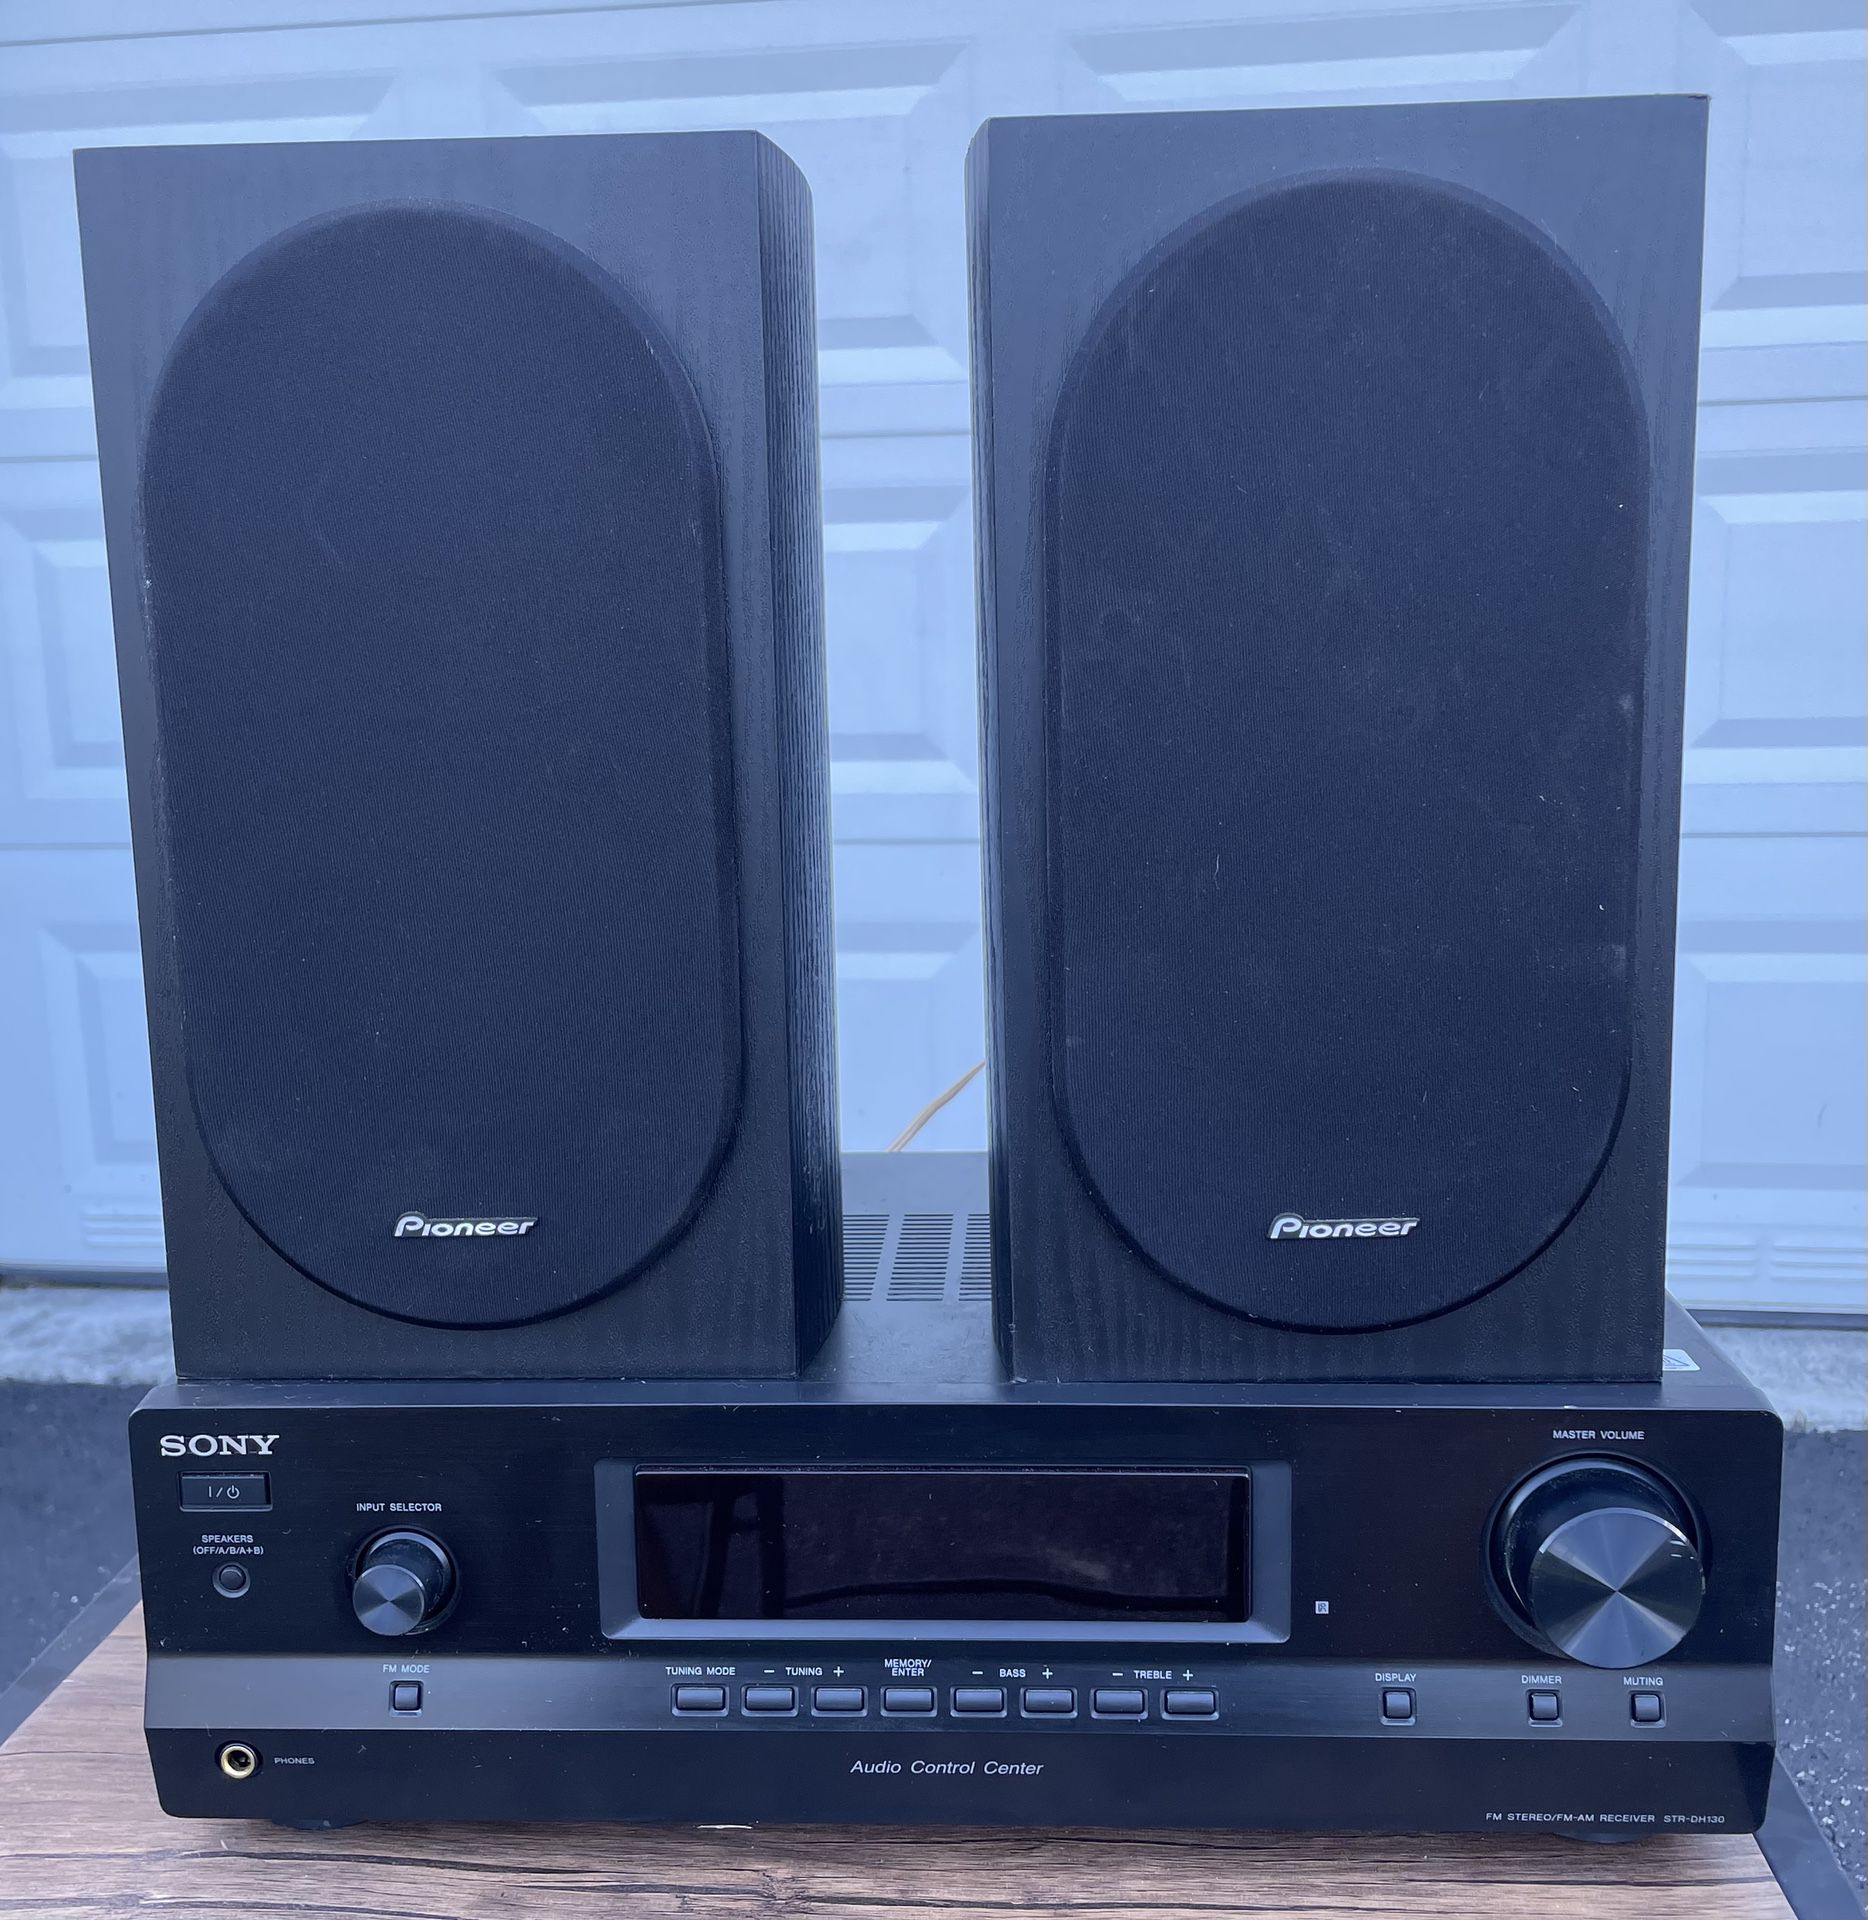 Sony AM/FM stereo receiver w/Pioneer speakers 